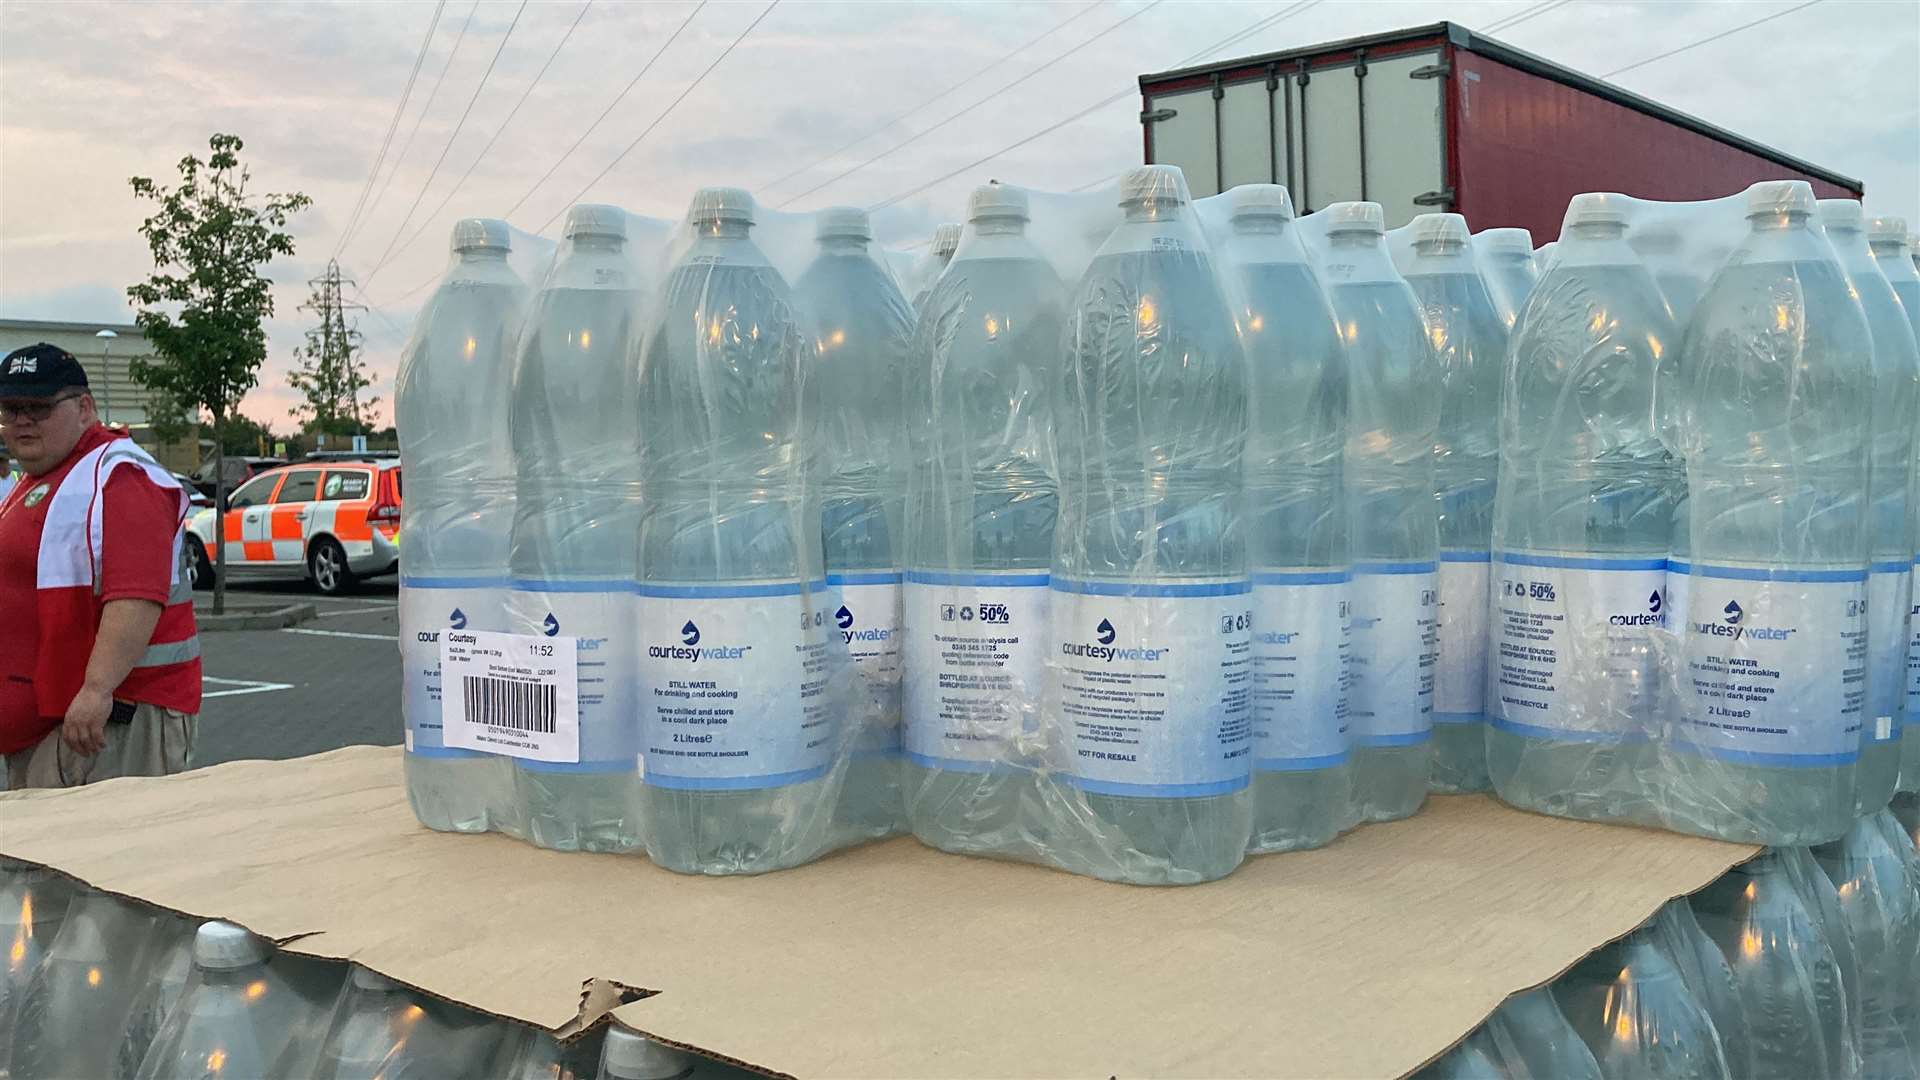 Residents had to rely on bottled water to drink